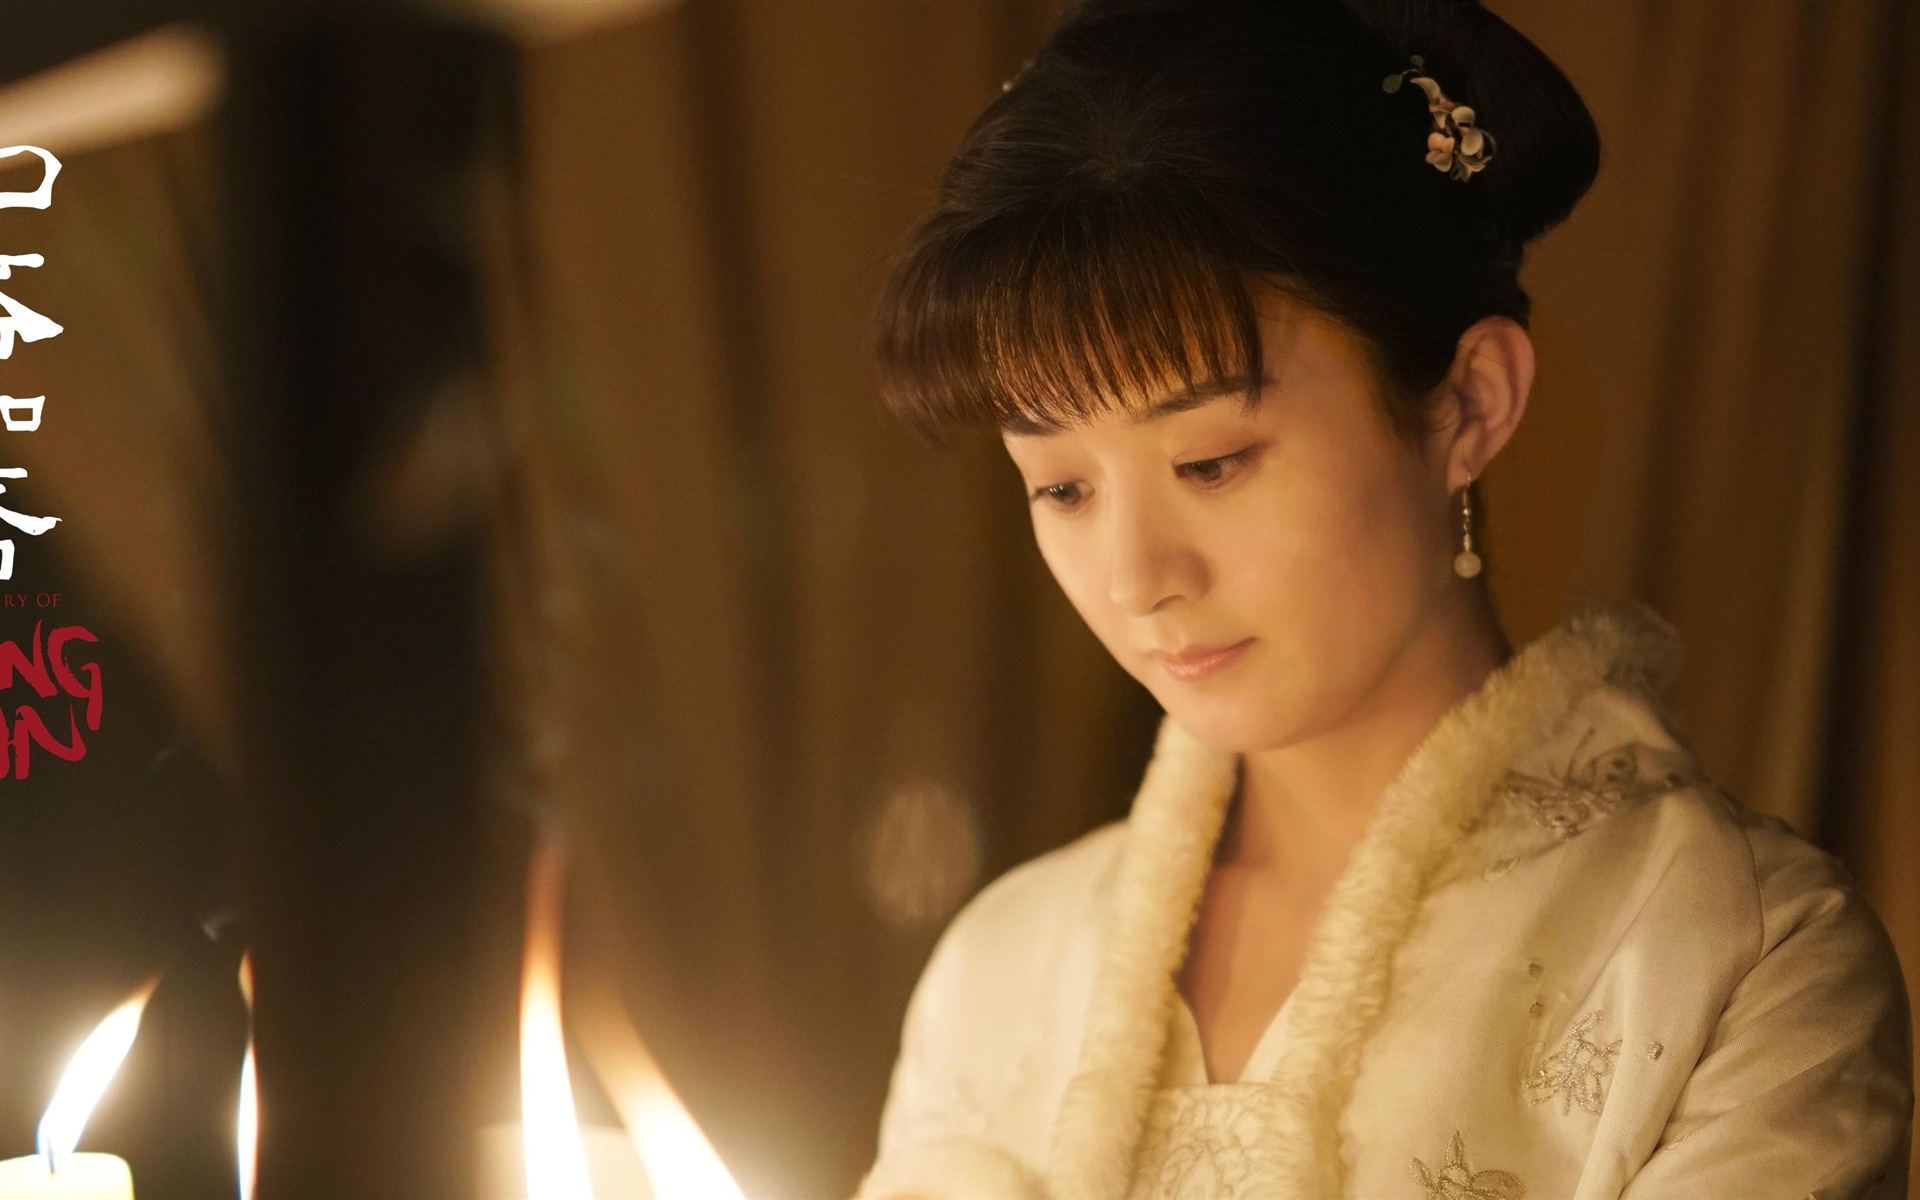 The Story Of MingLan, TV series HD wallpapers #41 - 1920x1200